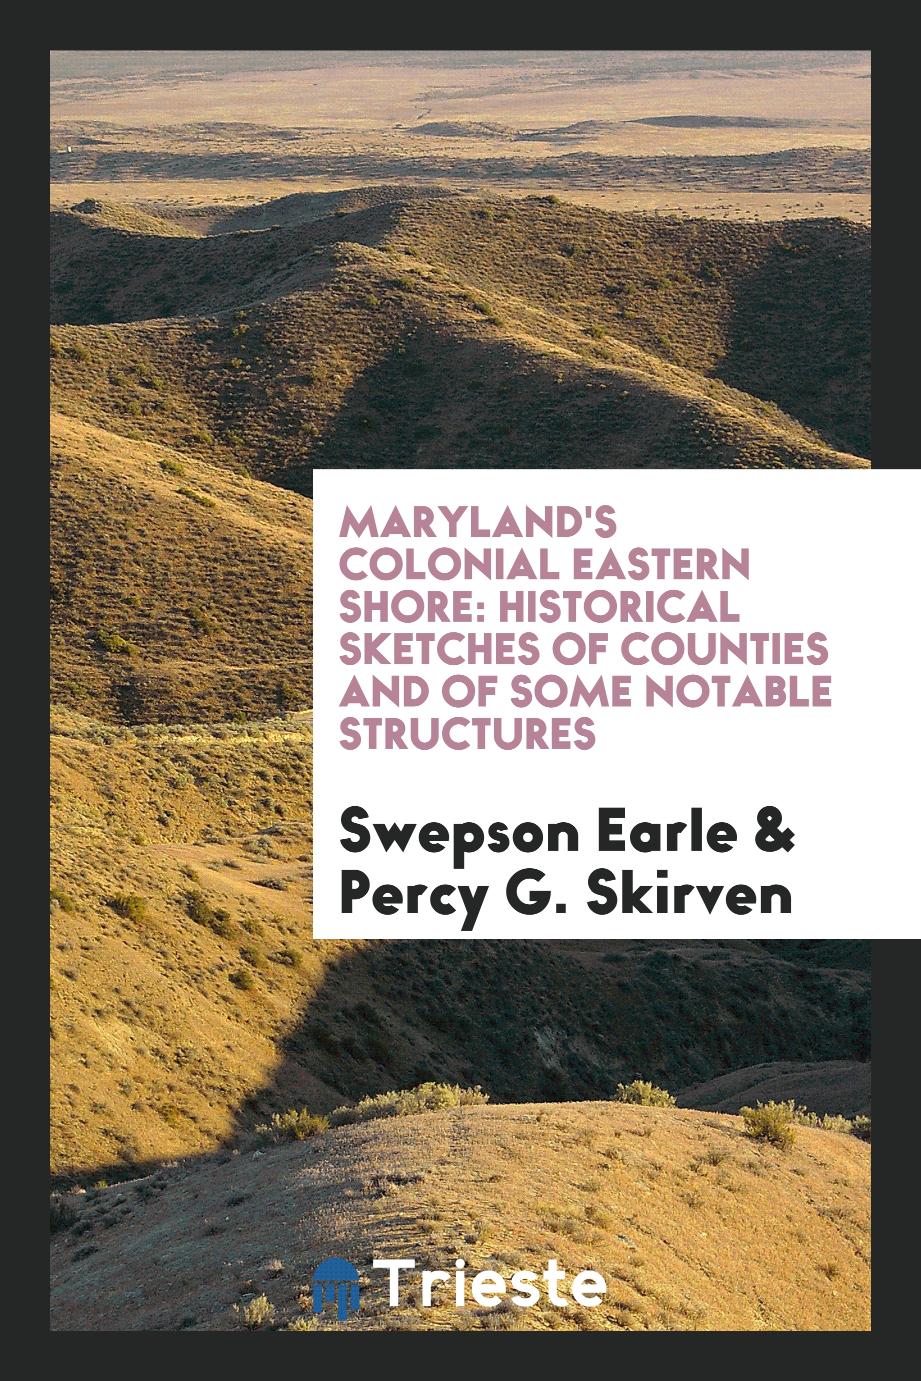 Maryland's Colonial Eastern Shore: Historical Sketches of Counties and of Some Notable Structures